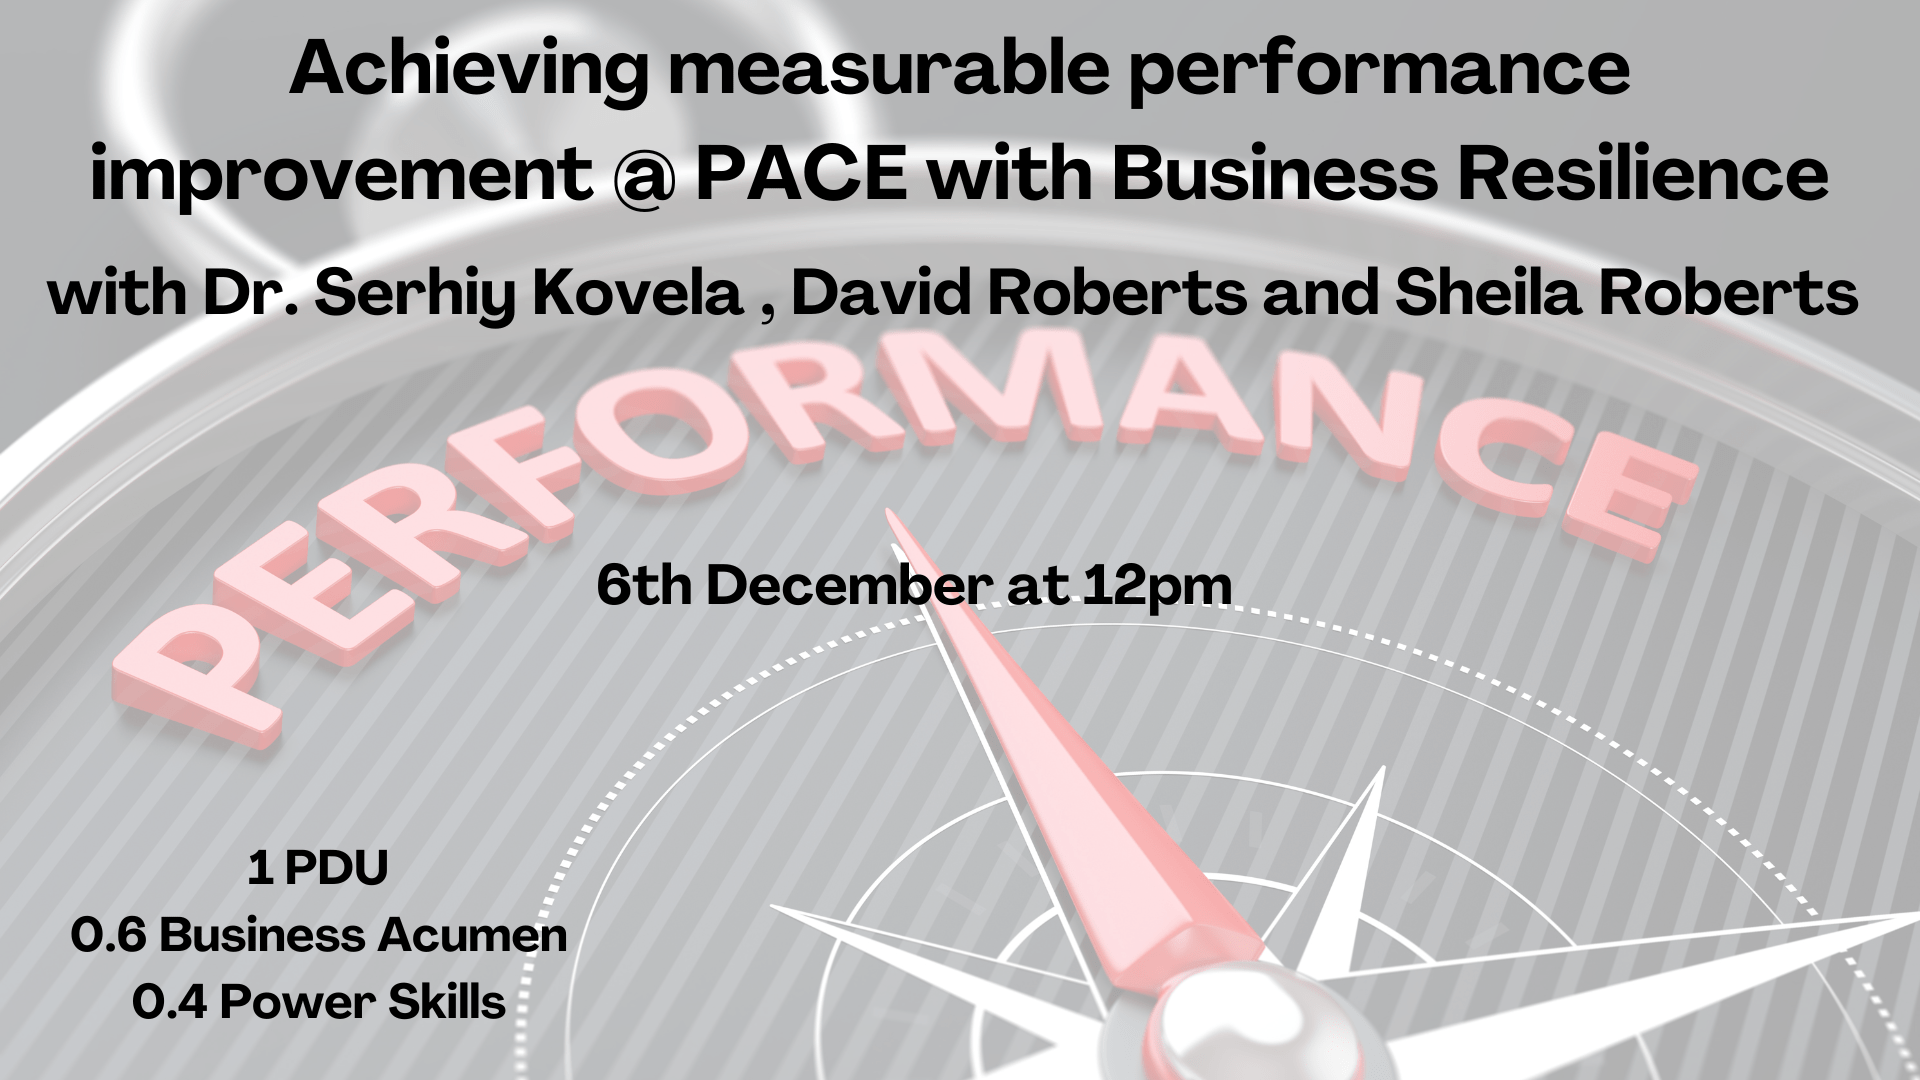 Achieving measurable performance @ PACE with Business Resilience